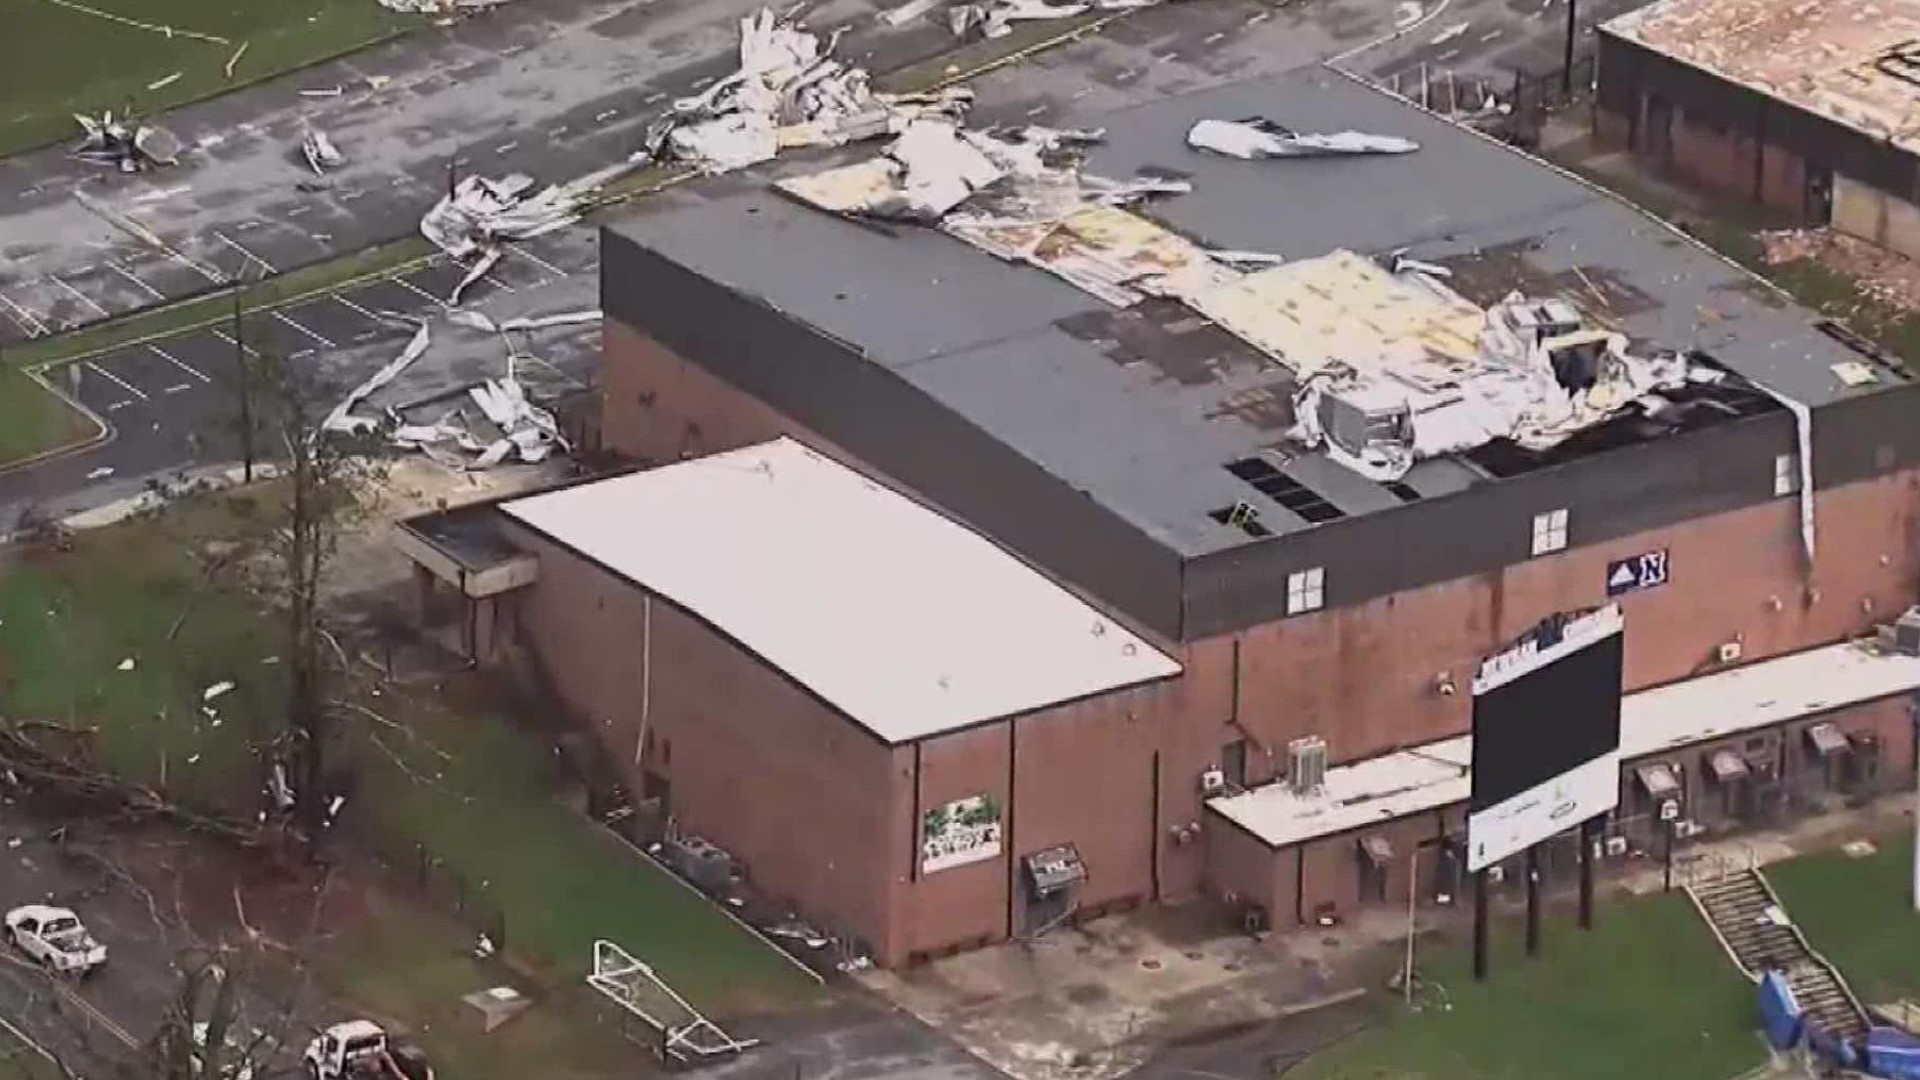 A year later, the high school still has damage from the storm but the community continues to uphold generations of traditions and say 'Newnan Strong.'